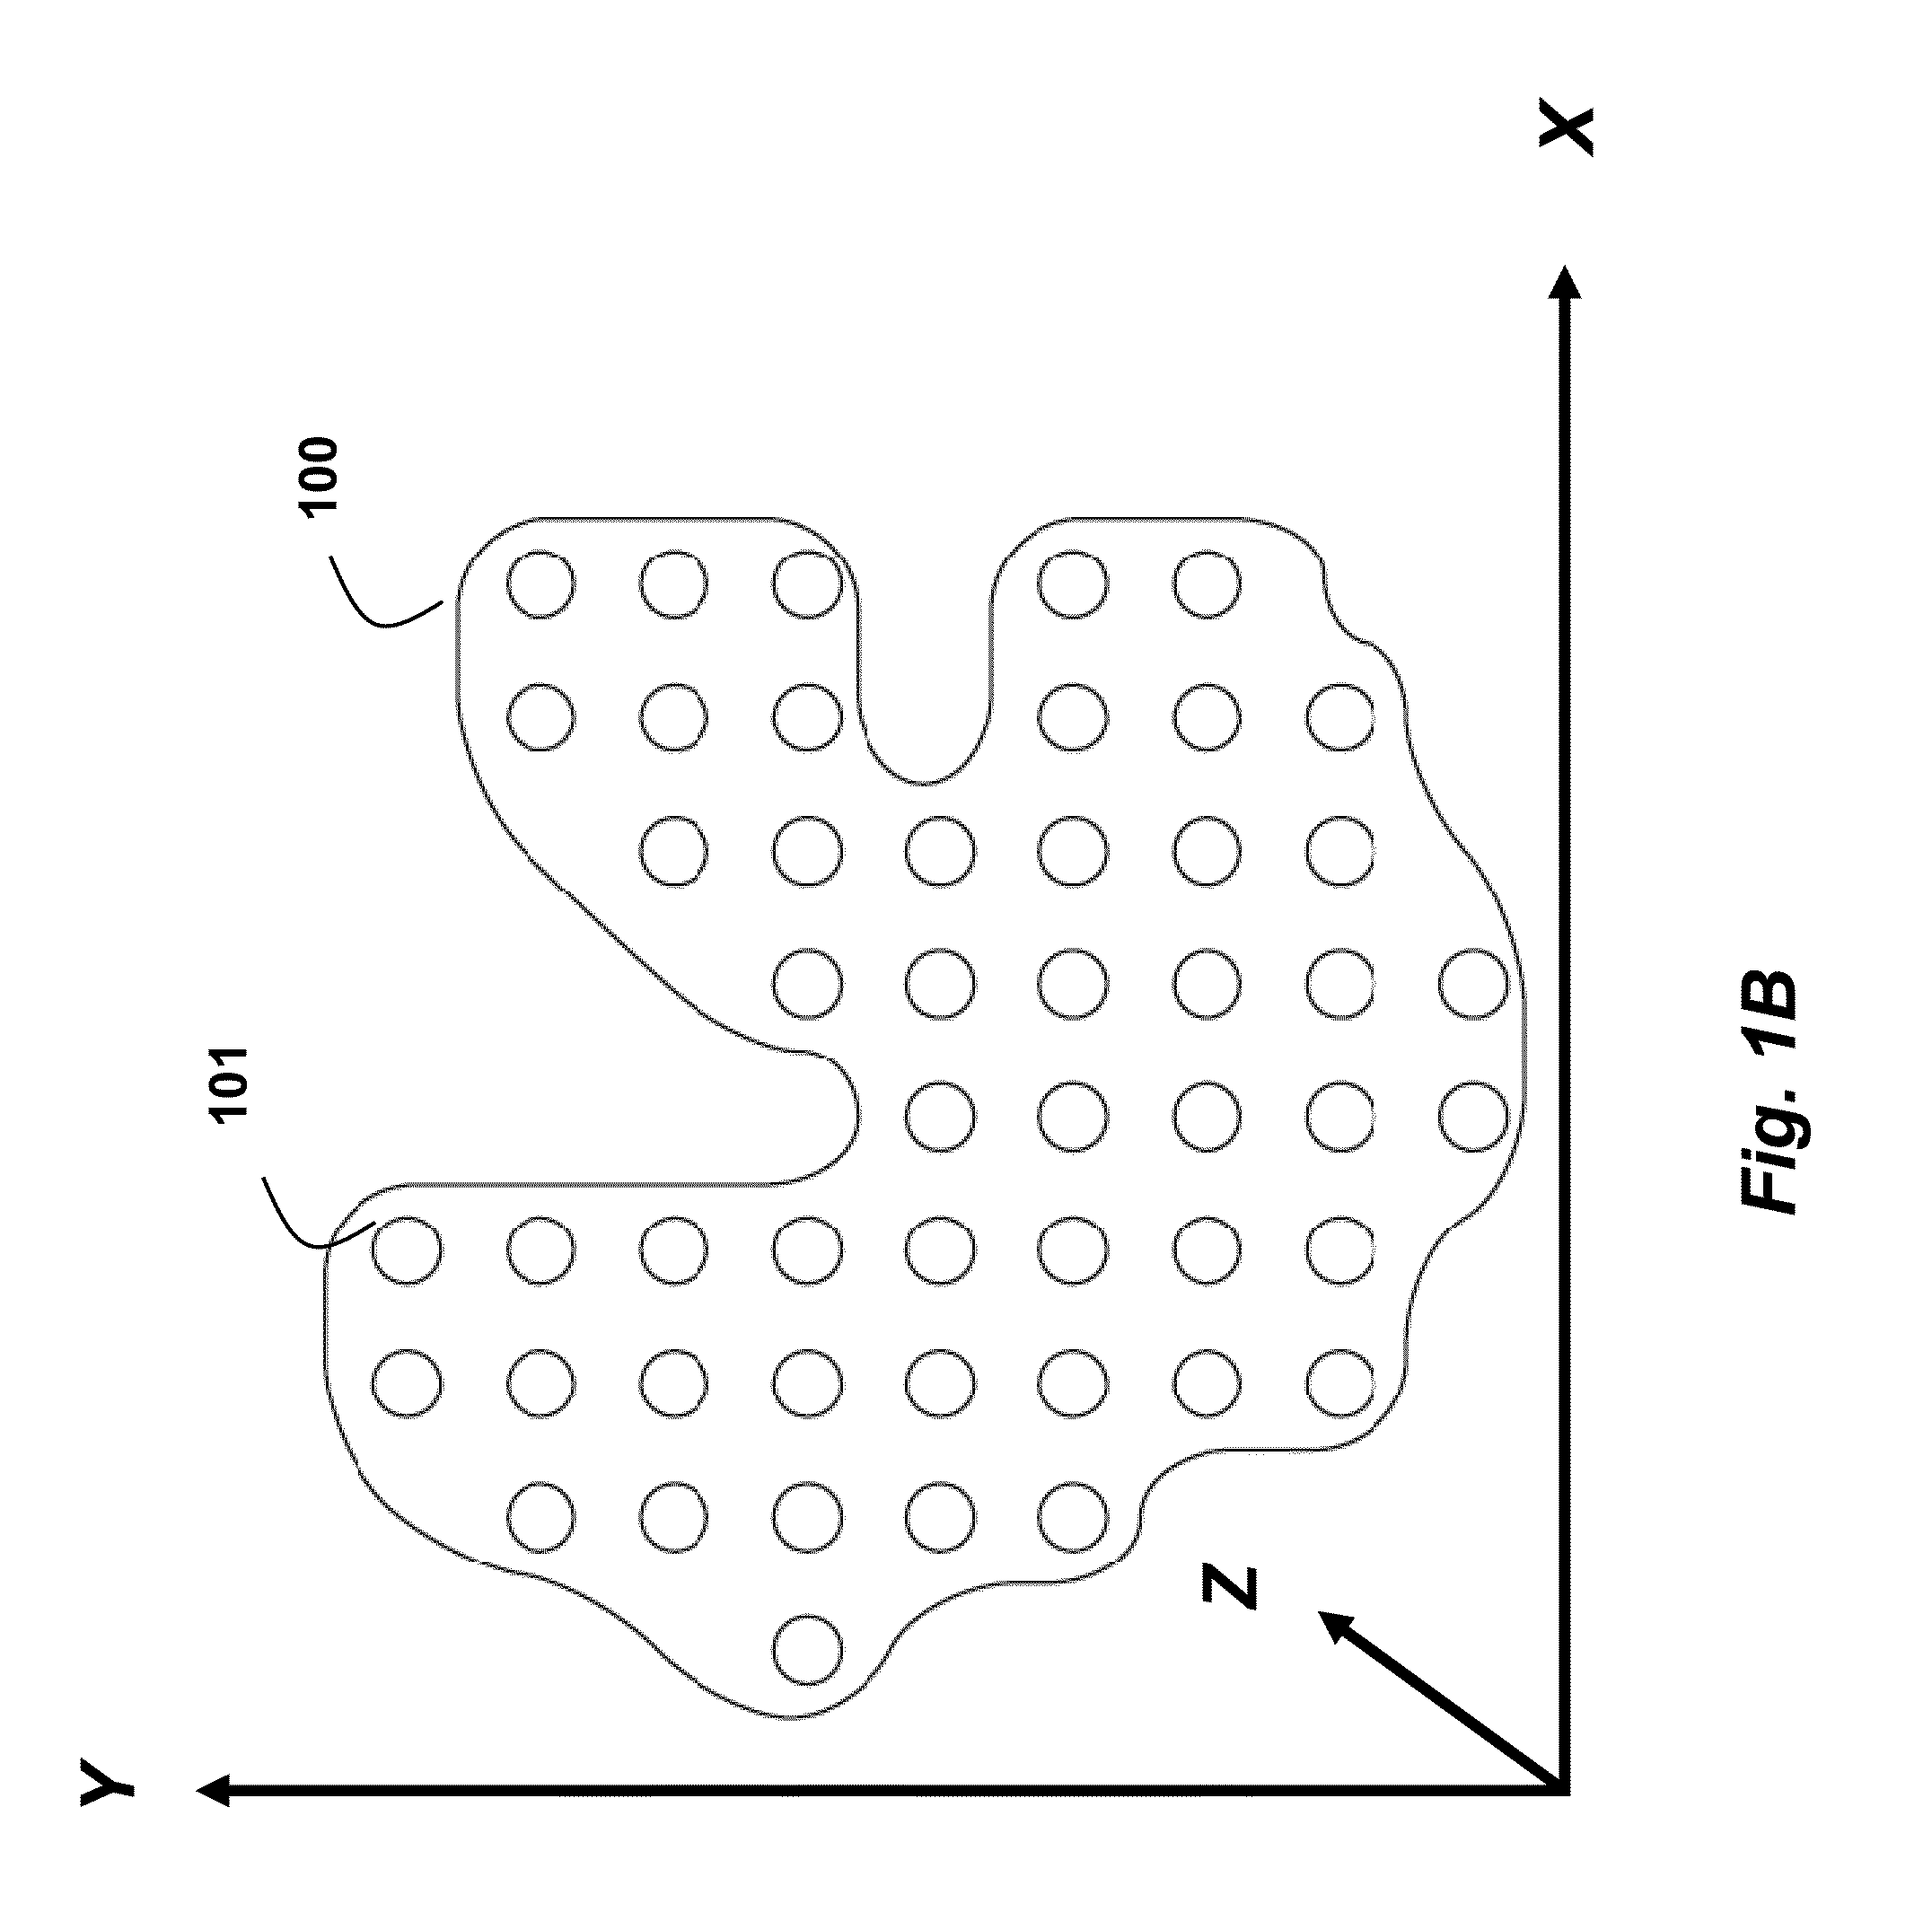 Method for Determining Paths of Particle Beams Through 3D Tissue Volumes